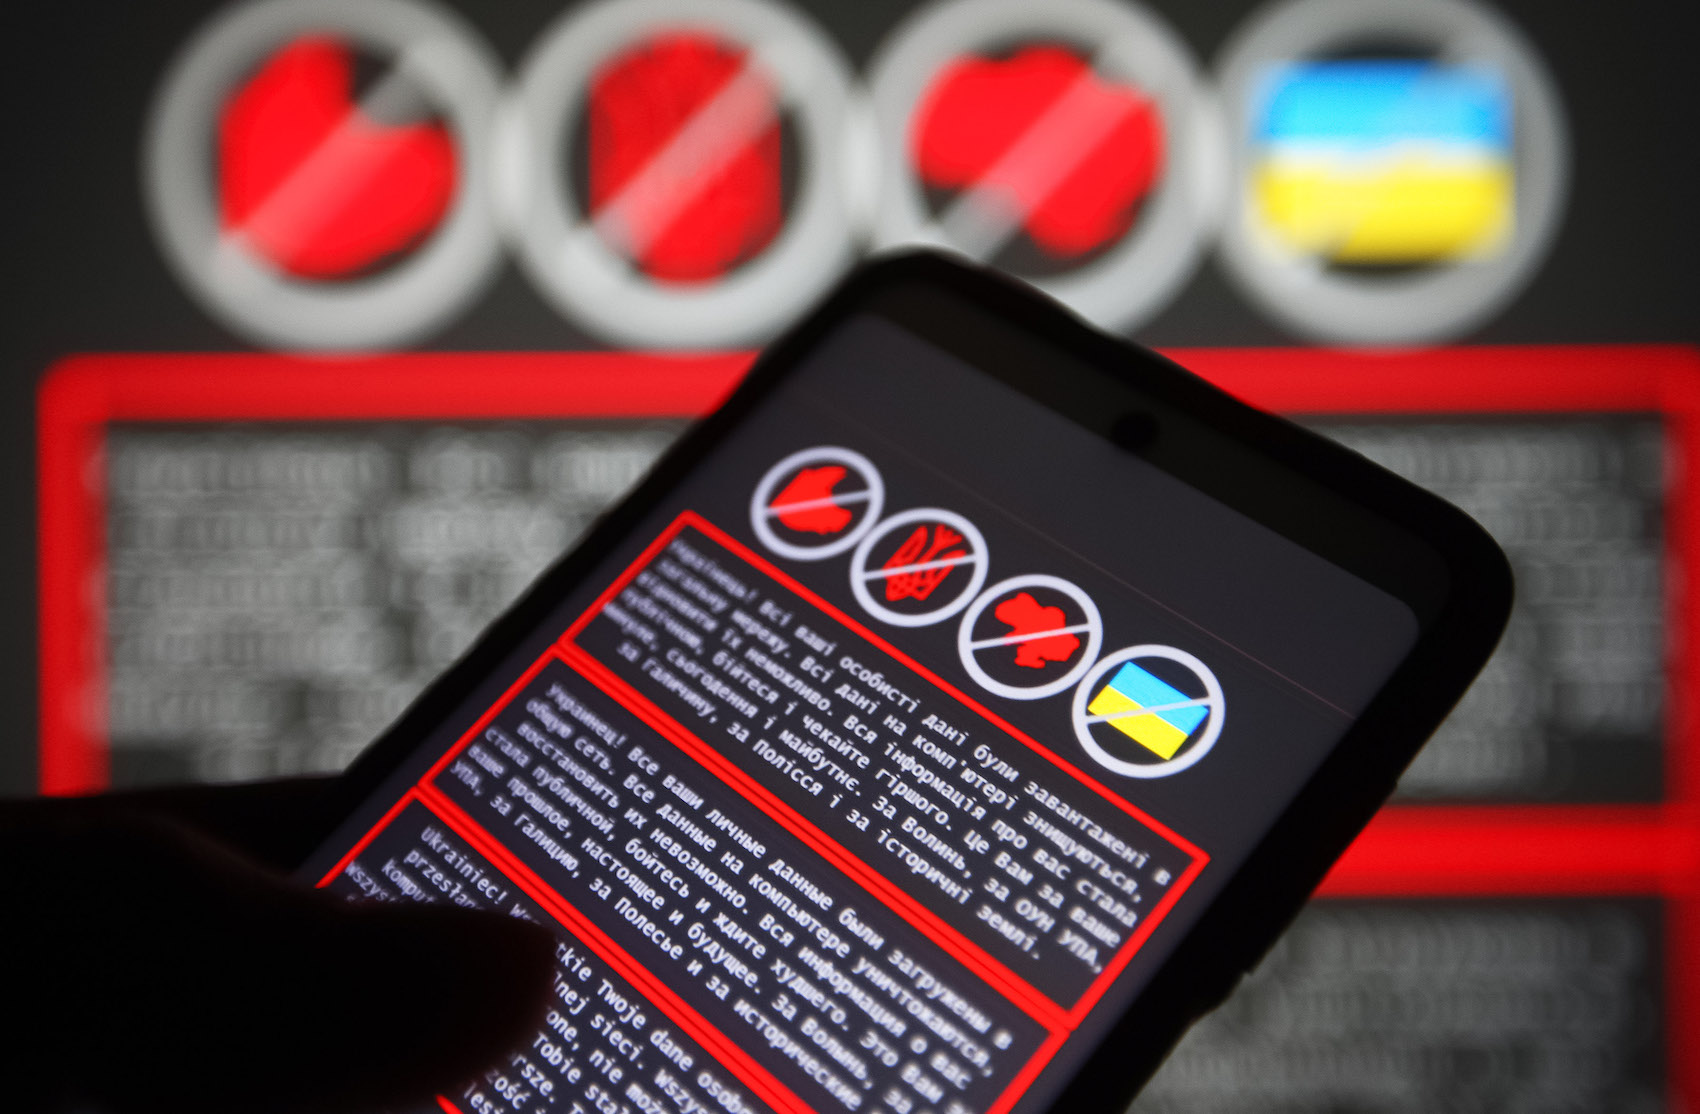 UKRAINE - 2022/01/14: In this photo illustration, a warning message in Ukrainian, Russian and Polish languages is displayed on a smartphone screen and in the background.
Hackers carried out attacks on several Ukraine's government websites, including the Ministry of Foreign Affairs, the Ministry of Education and Science, the State Service for Emergency Situation and others, reportedly by local media. This attack, on Ukrainian government web resources is the largest in the last four years. (Photo Illustration by Pavlo Gonchar/SOPA Images/LightRocket via Getty Images)